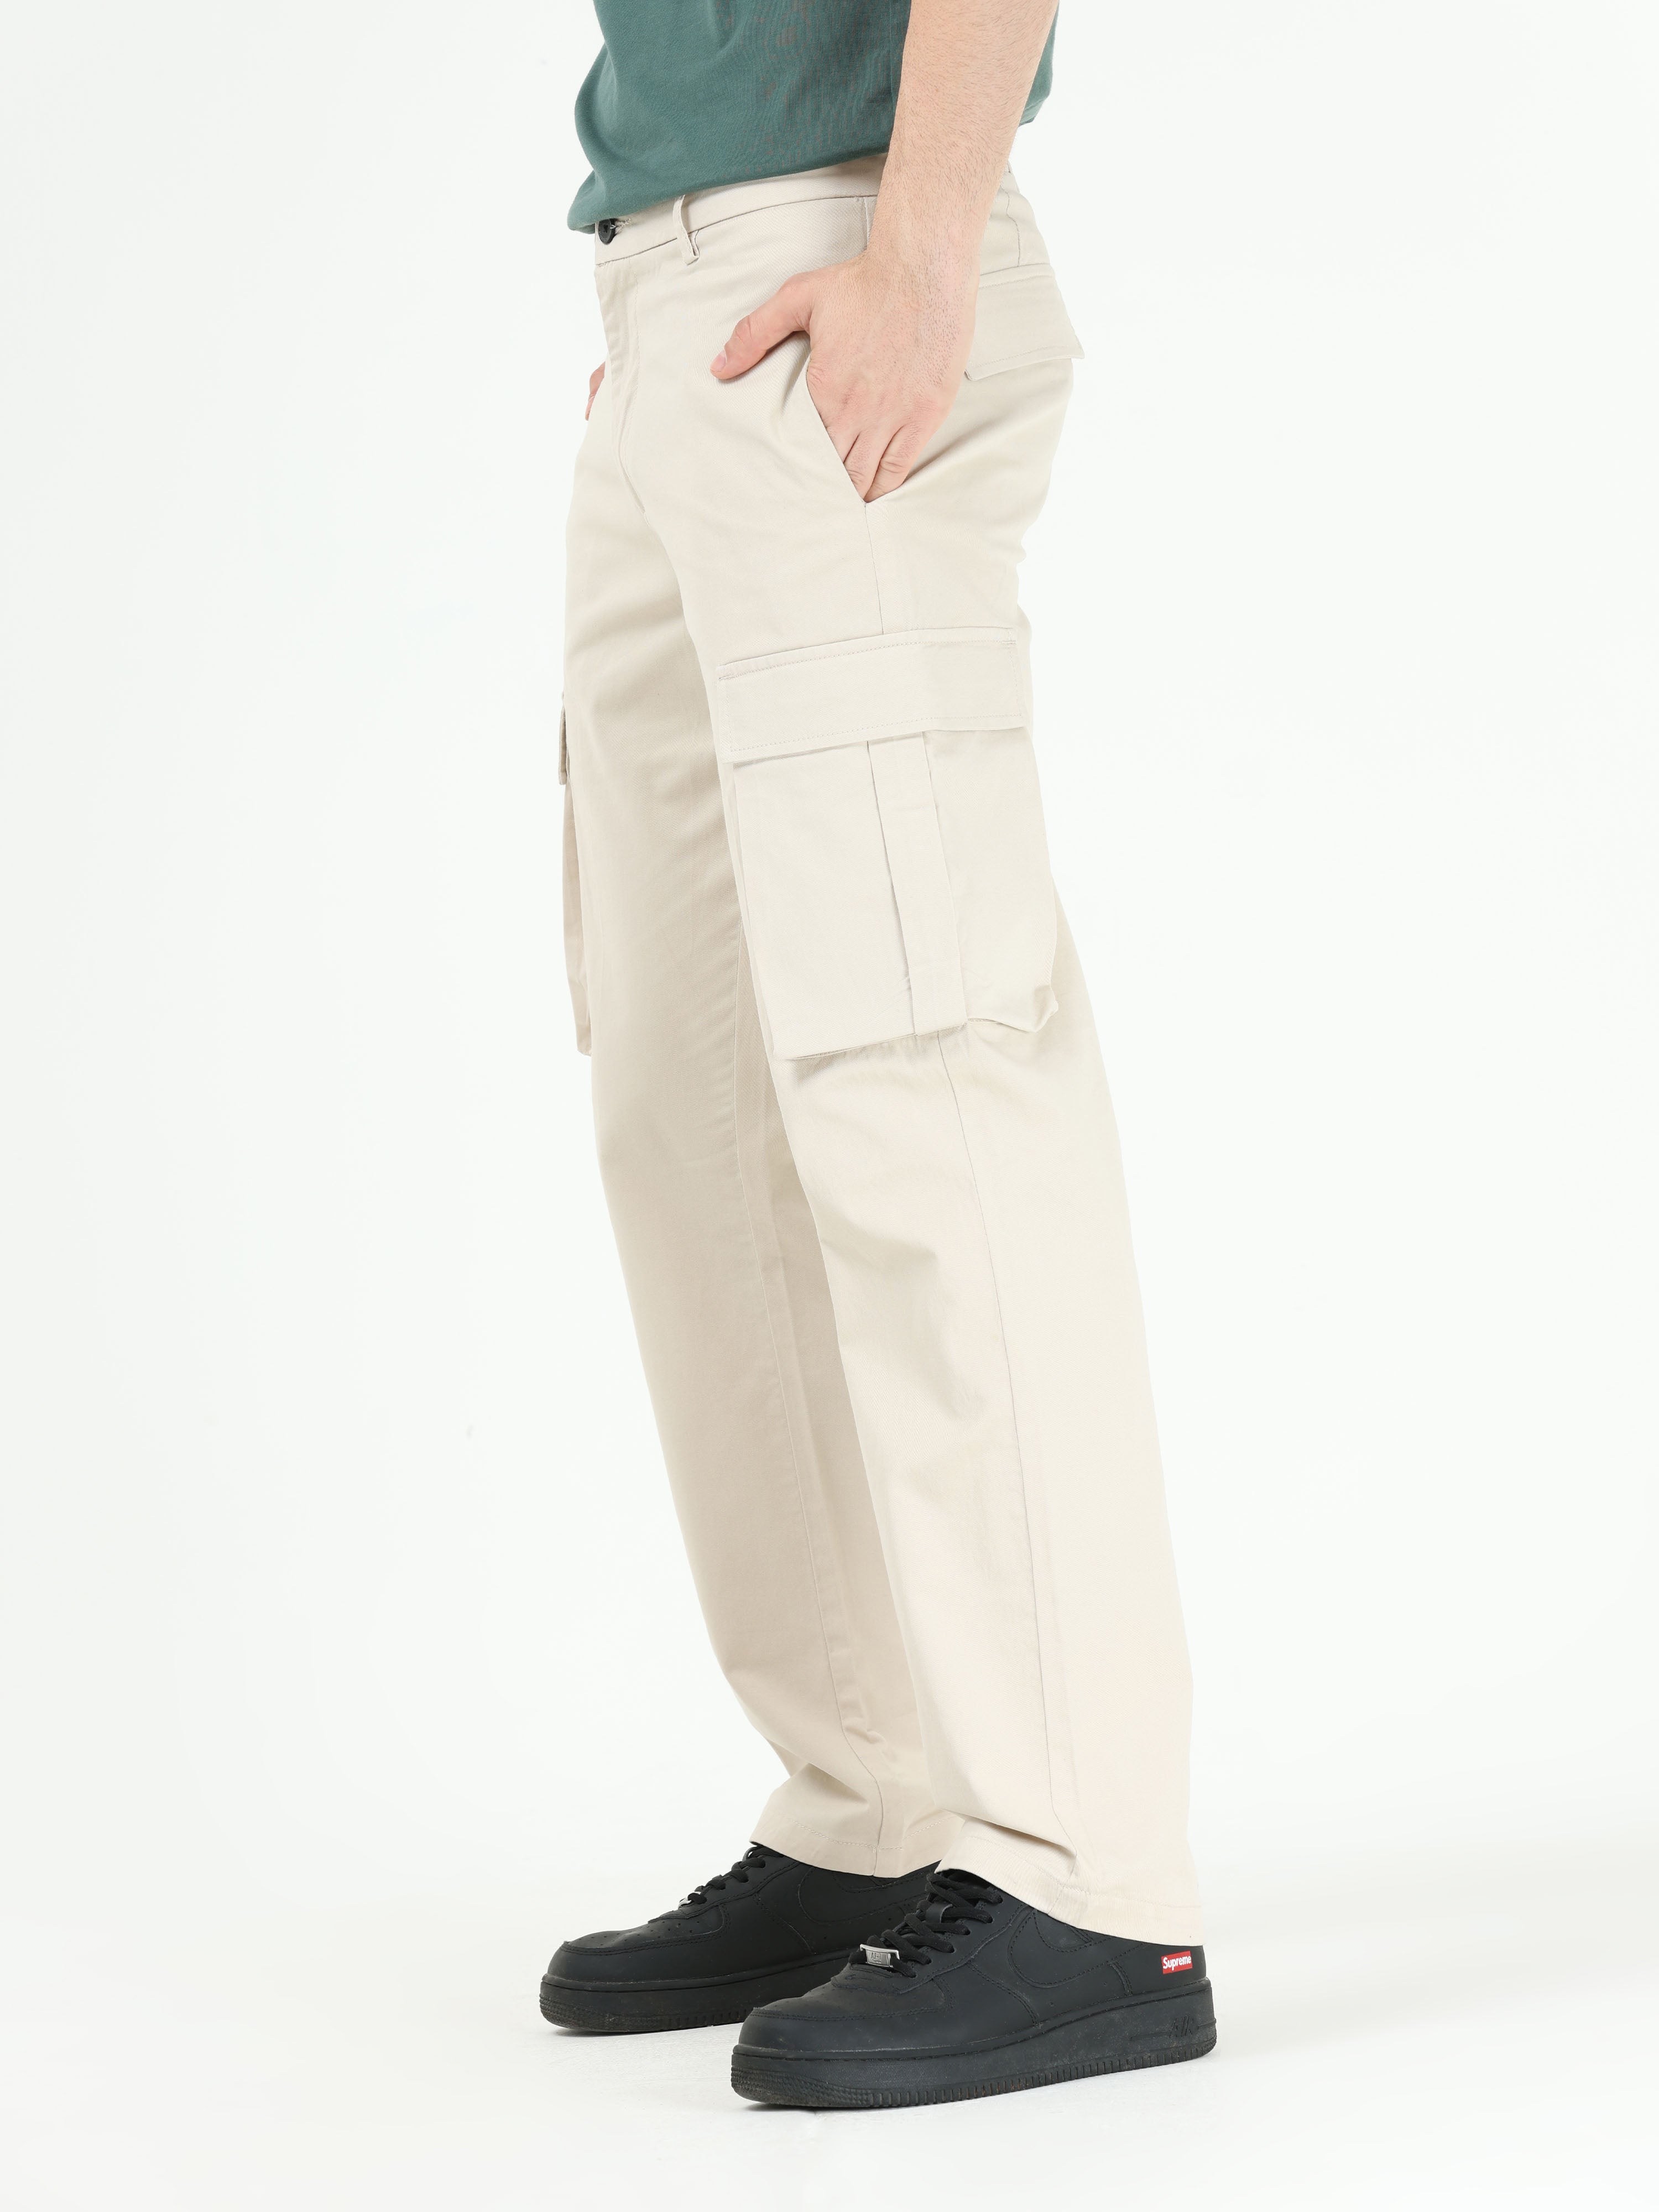 Finest Twill Cream Baggy Fit Cargo